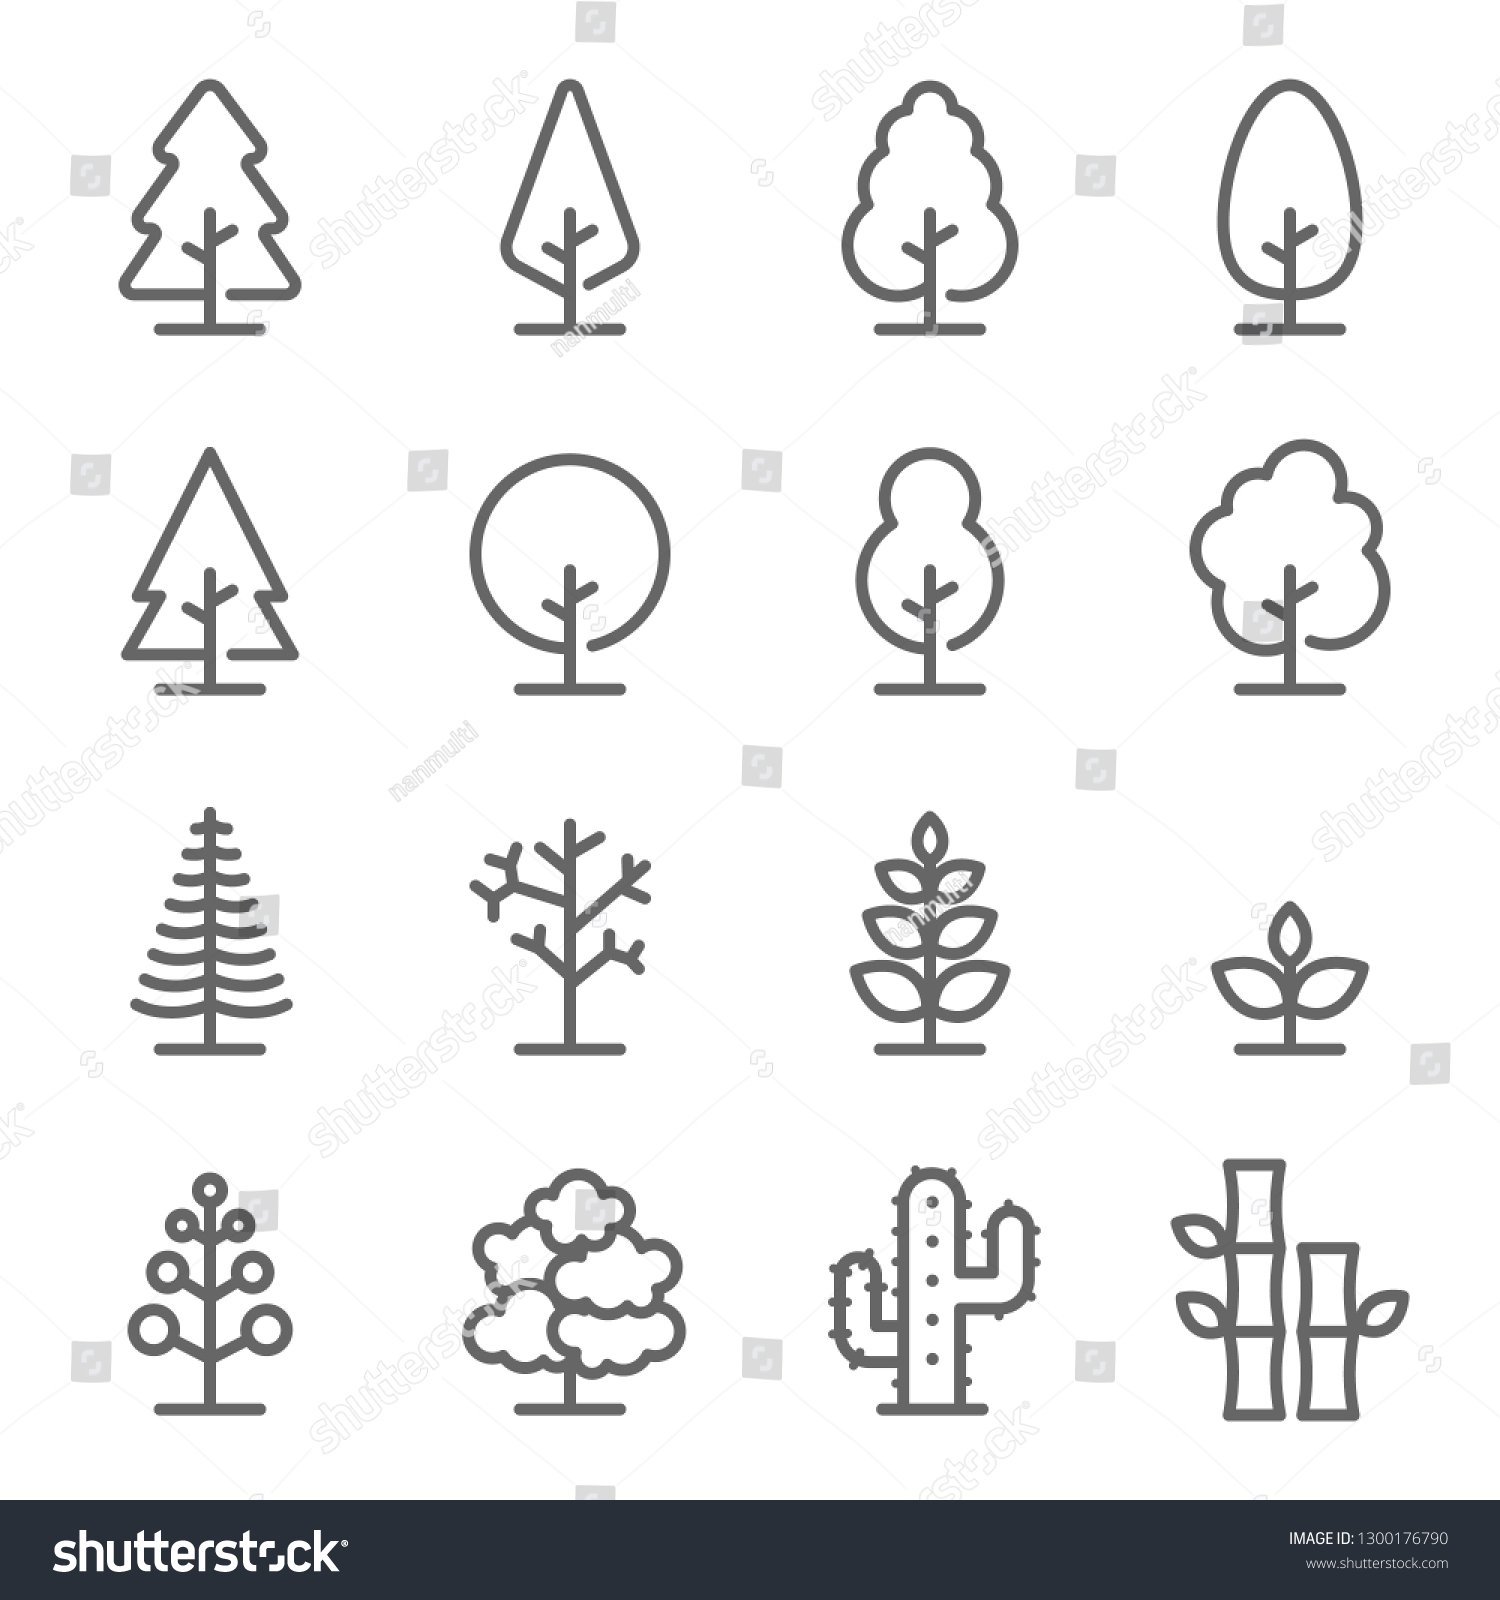 Tree Vector Line Icon Set. Contains such Icons as Wood, Plant, Pine, Cactus, Bamboo and more. Expanded Stroke #1300176790